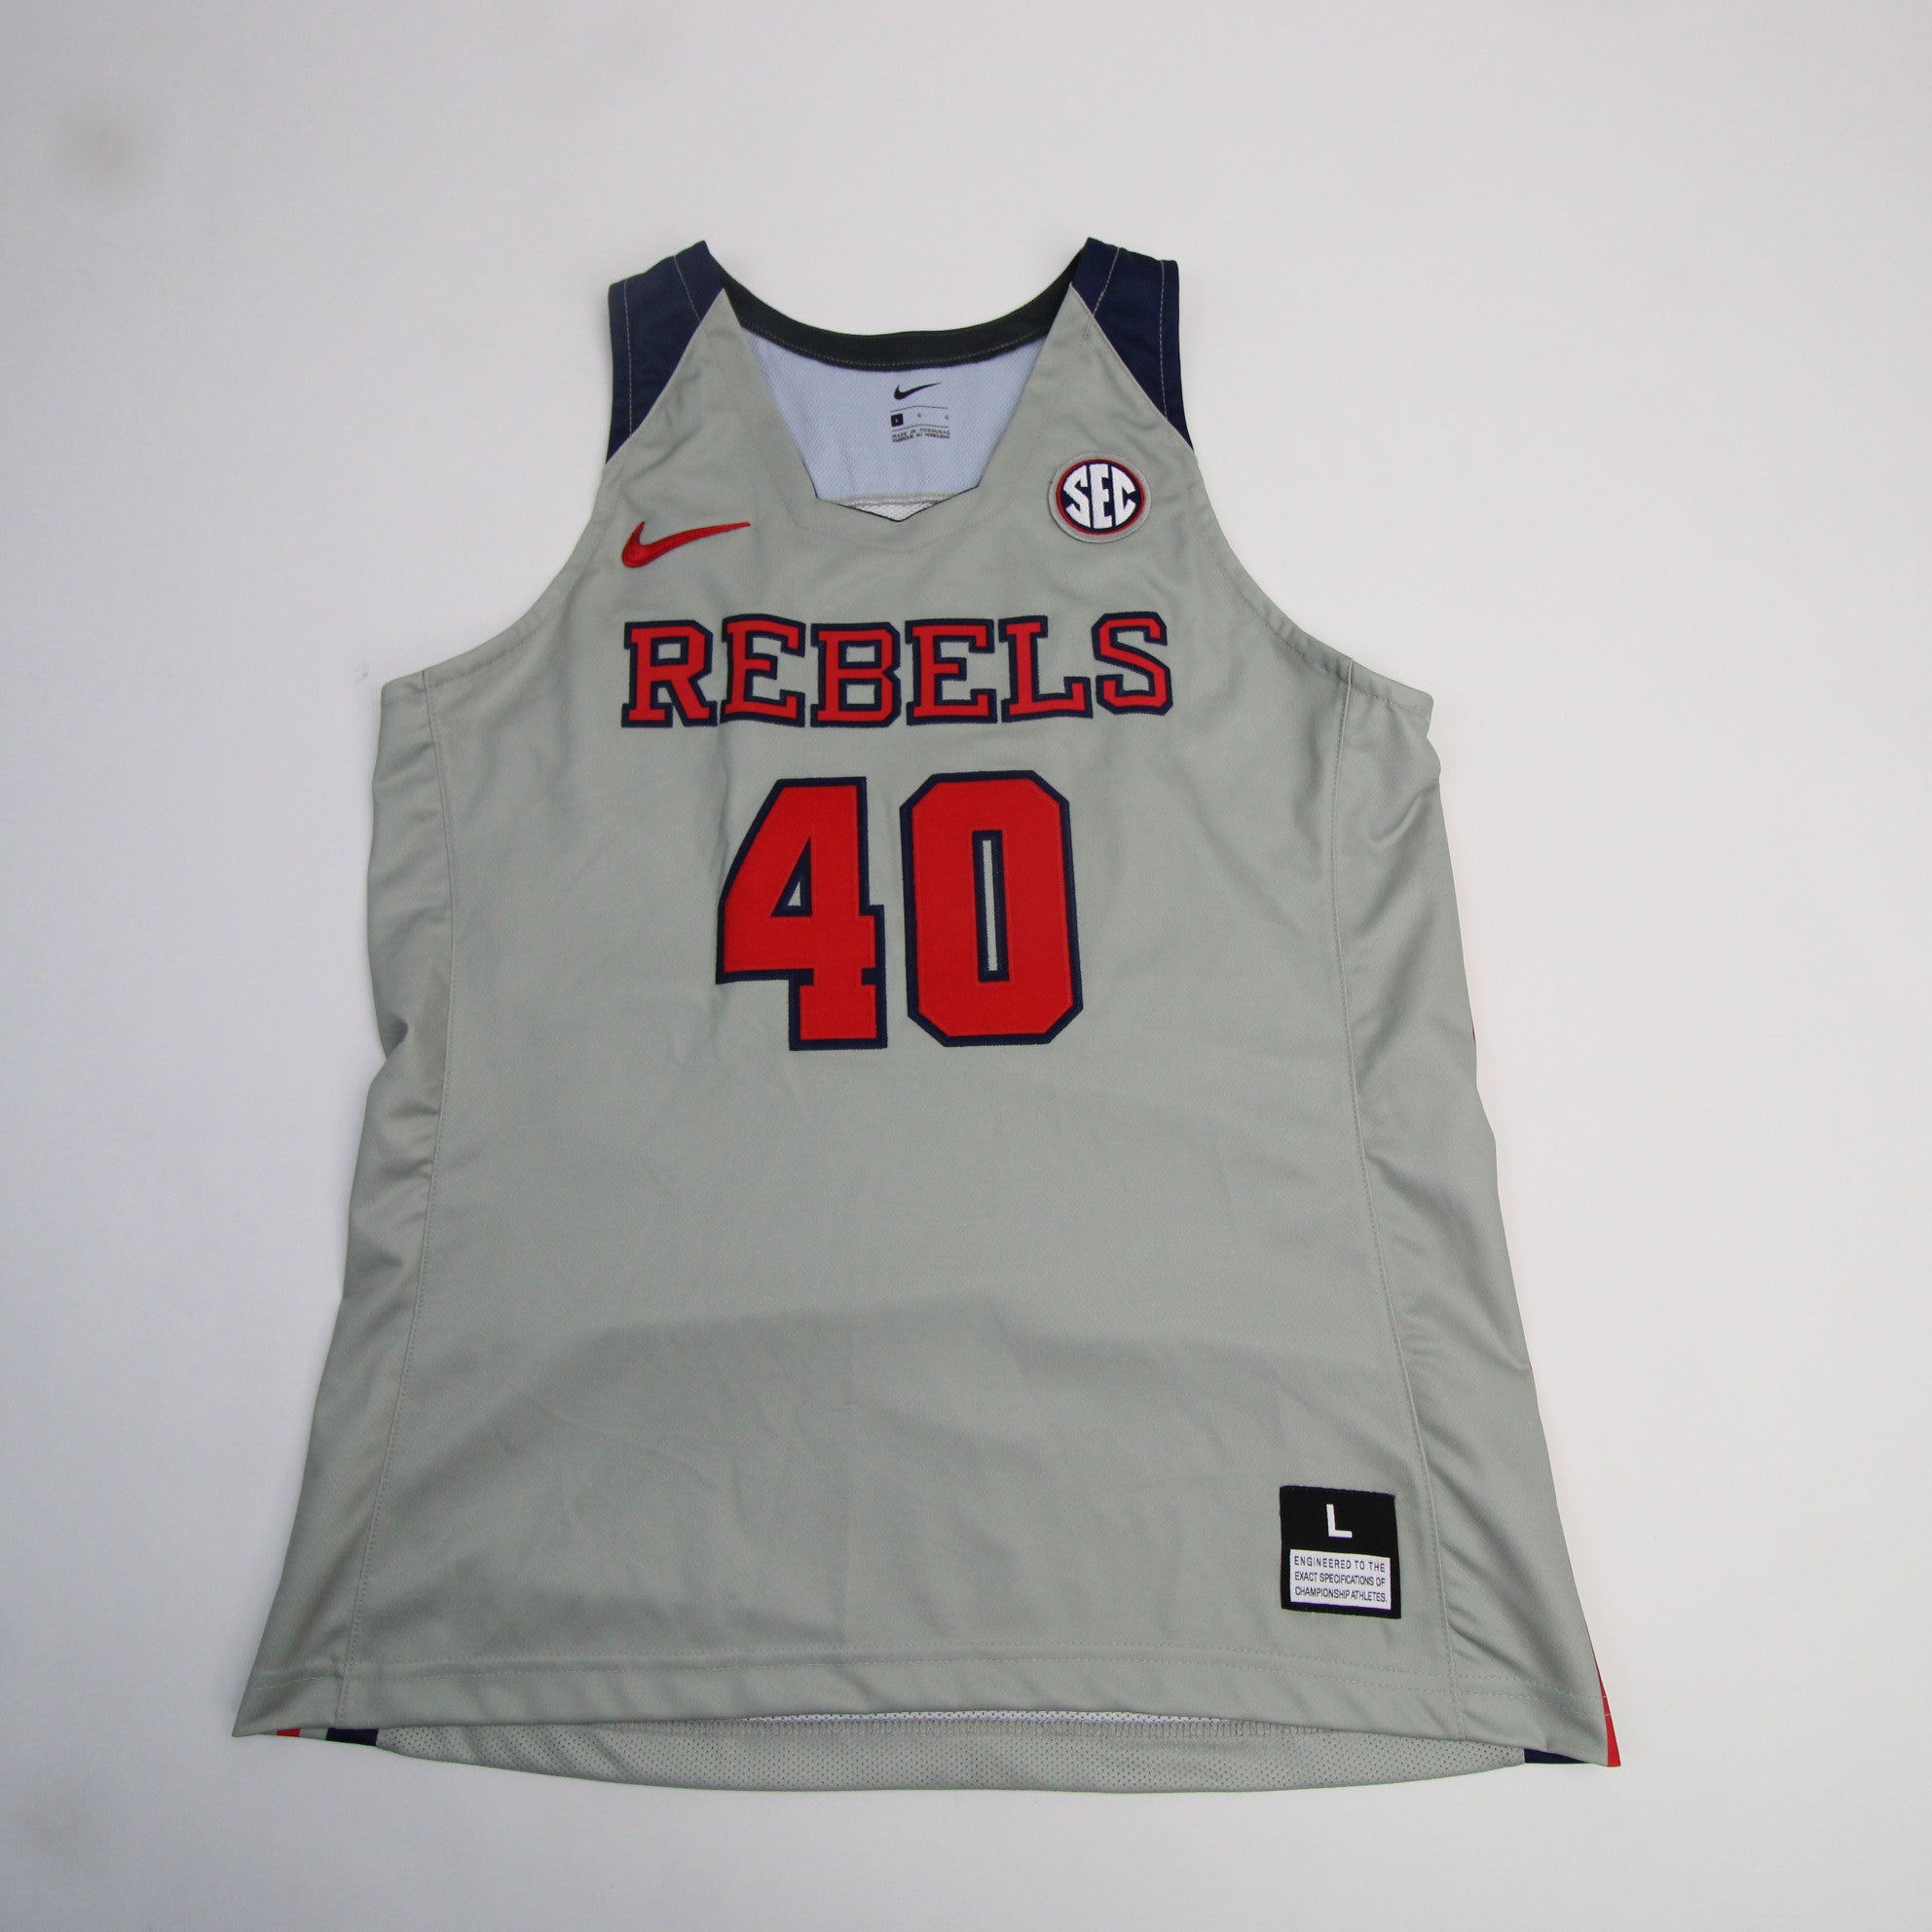 Ole Miss Rebels Nike Practice Jersey - Basketball Men's Blue/Red Used S